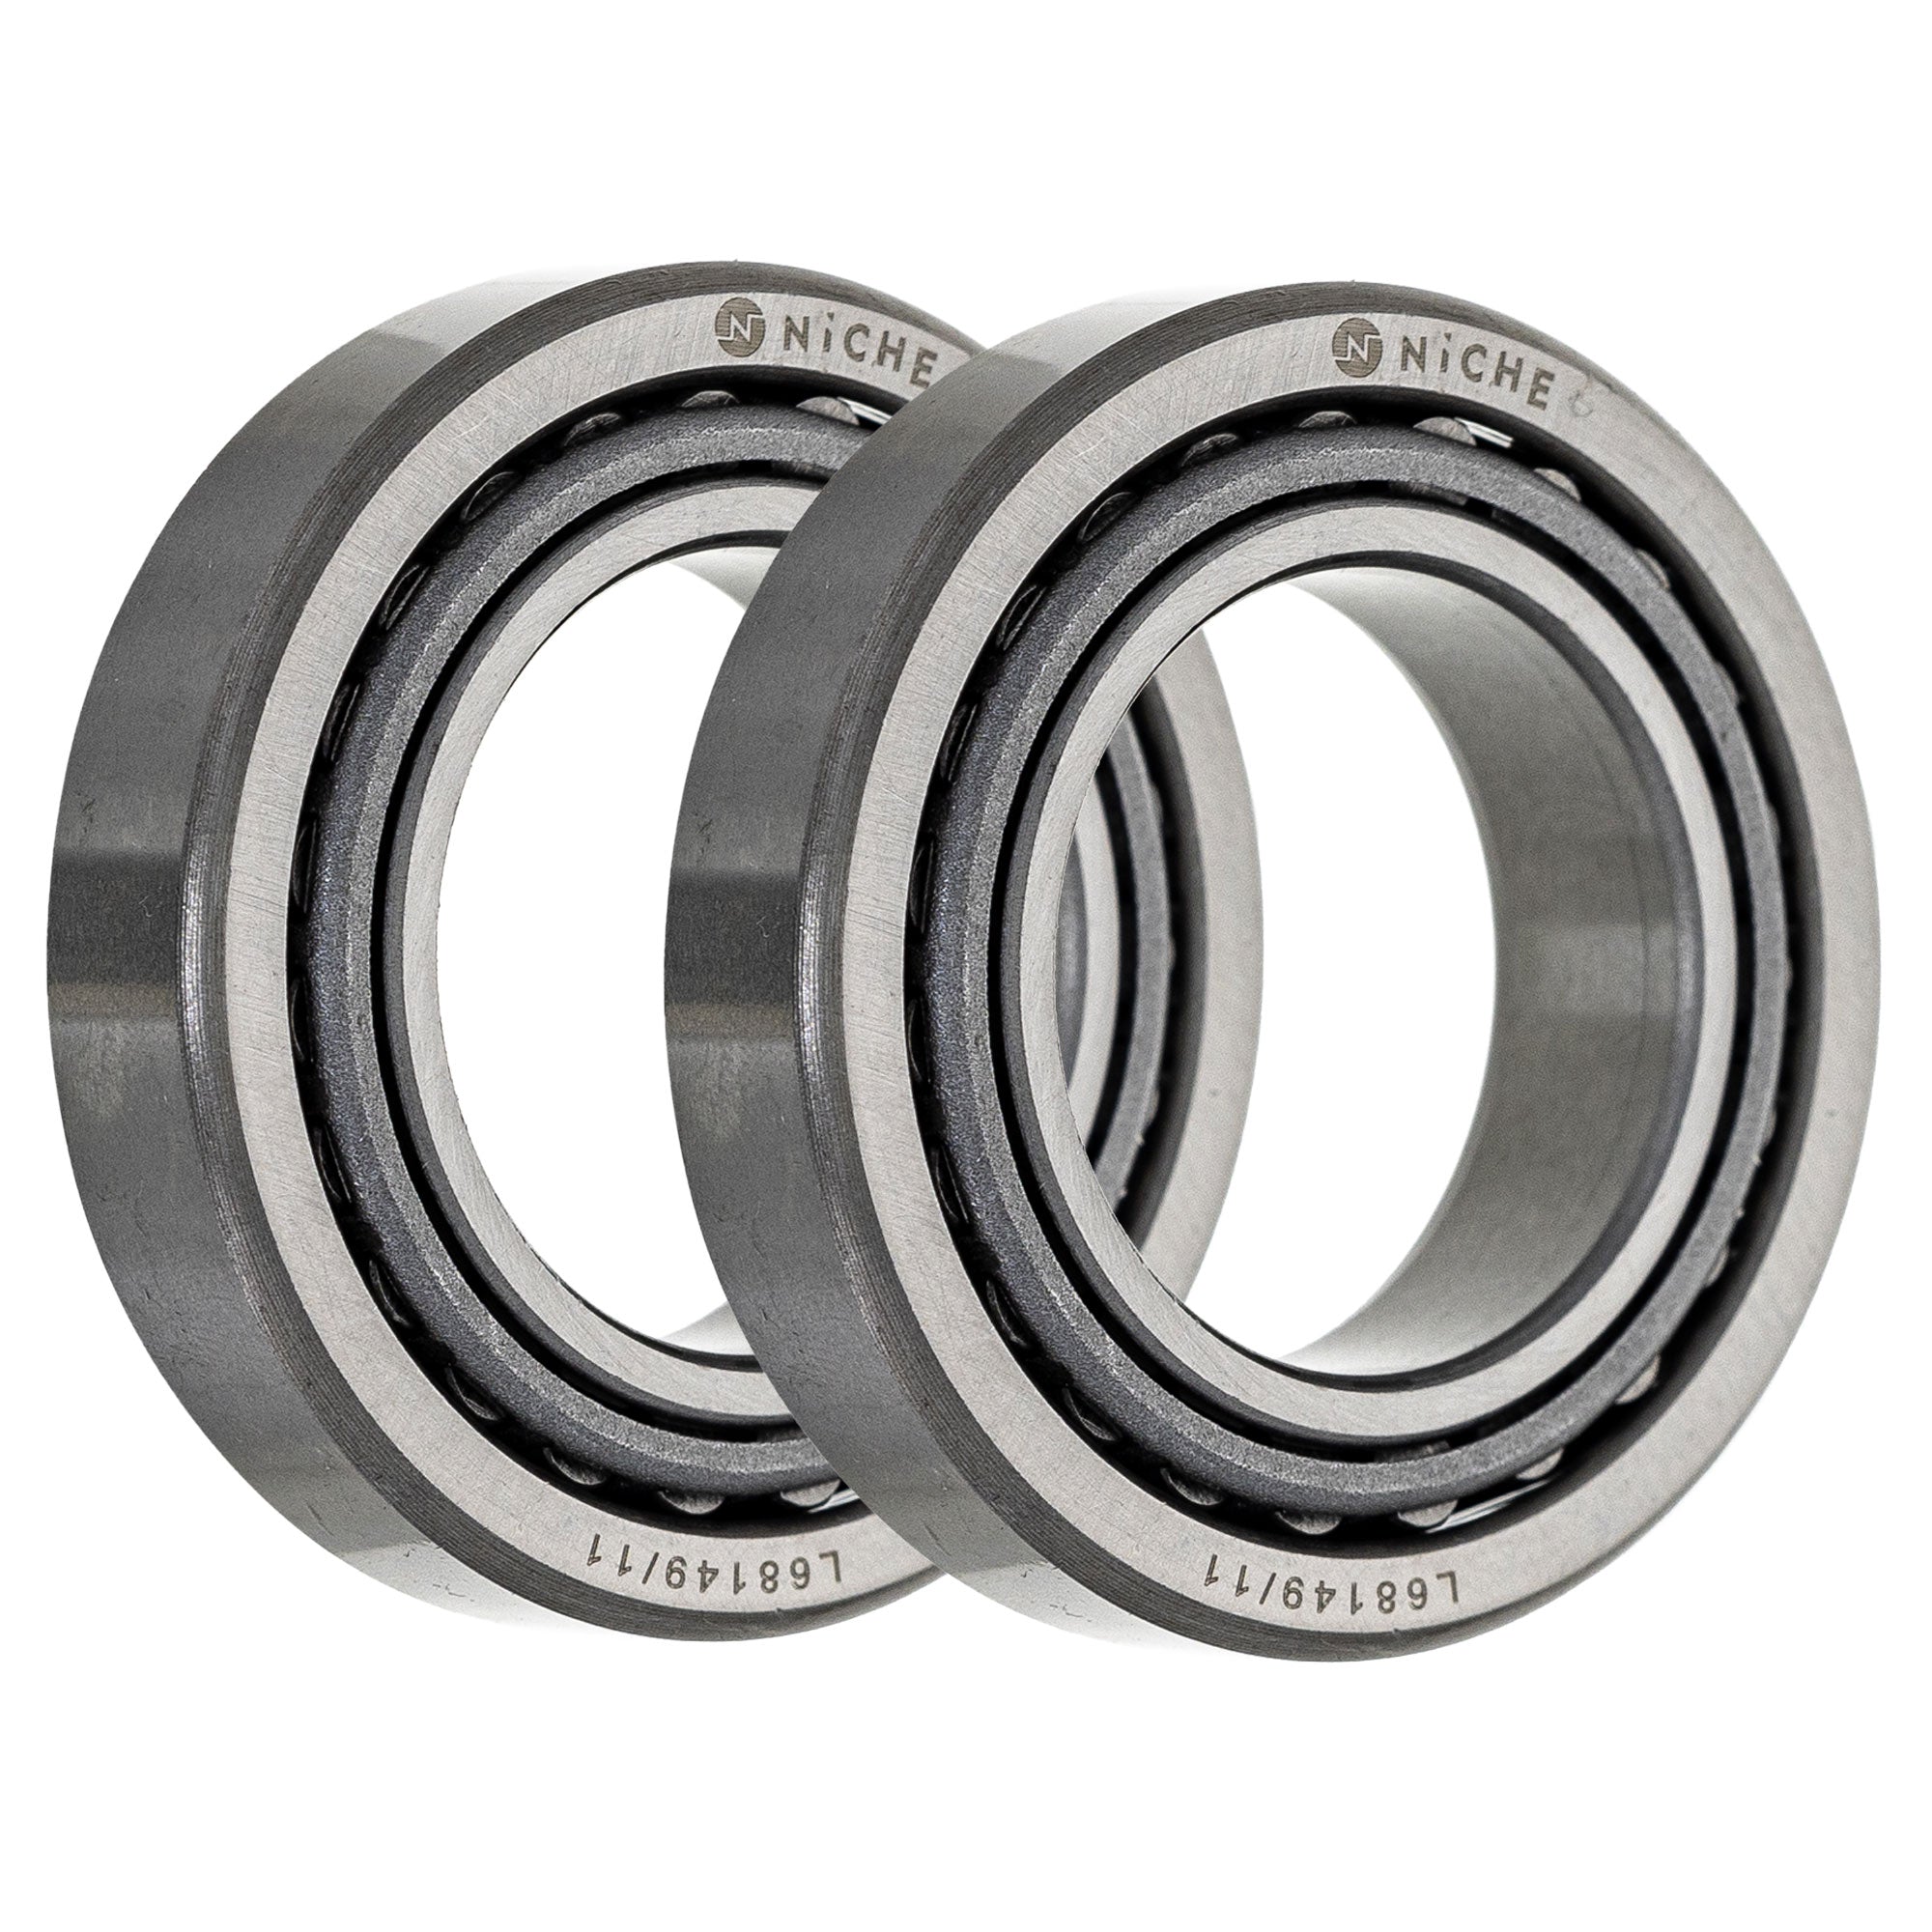 Tapered Roller Bearing Pack of 2 2-Pack for zOTHER Xpress Xplorer Xpedition Worker NICHE 519-CBB2285R